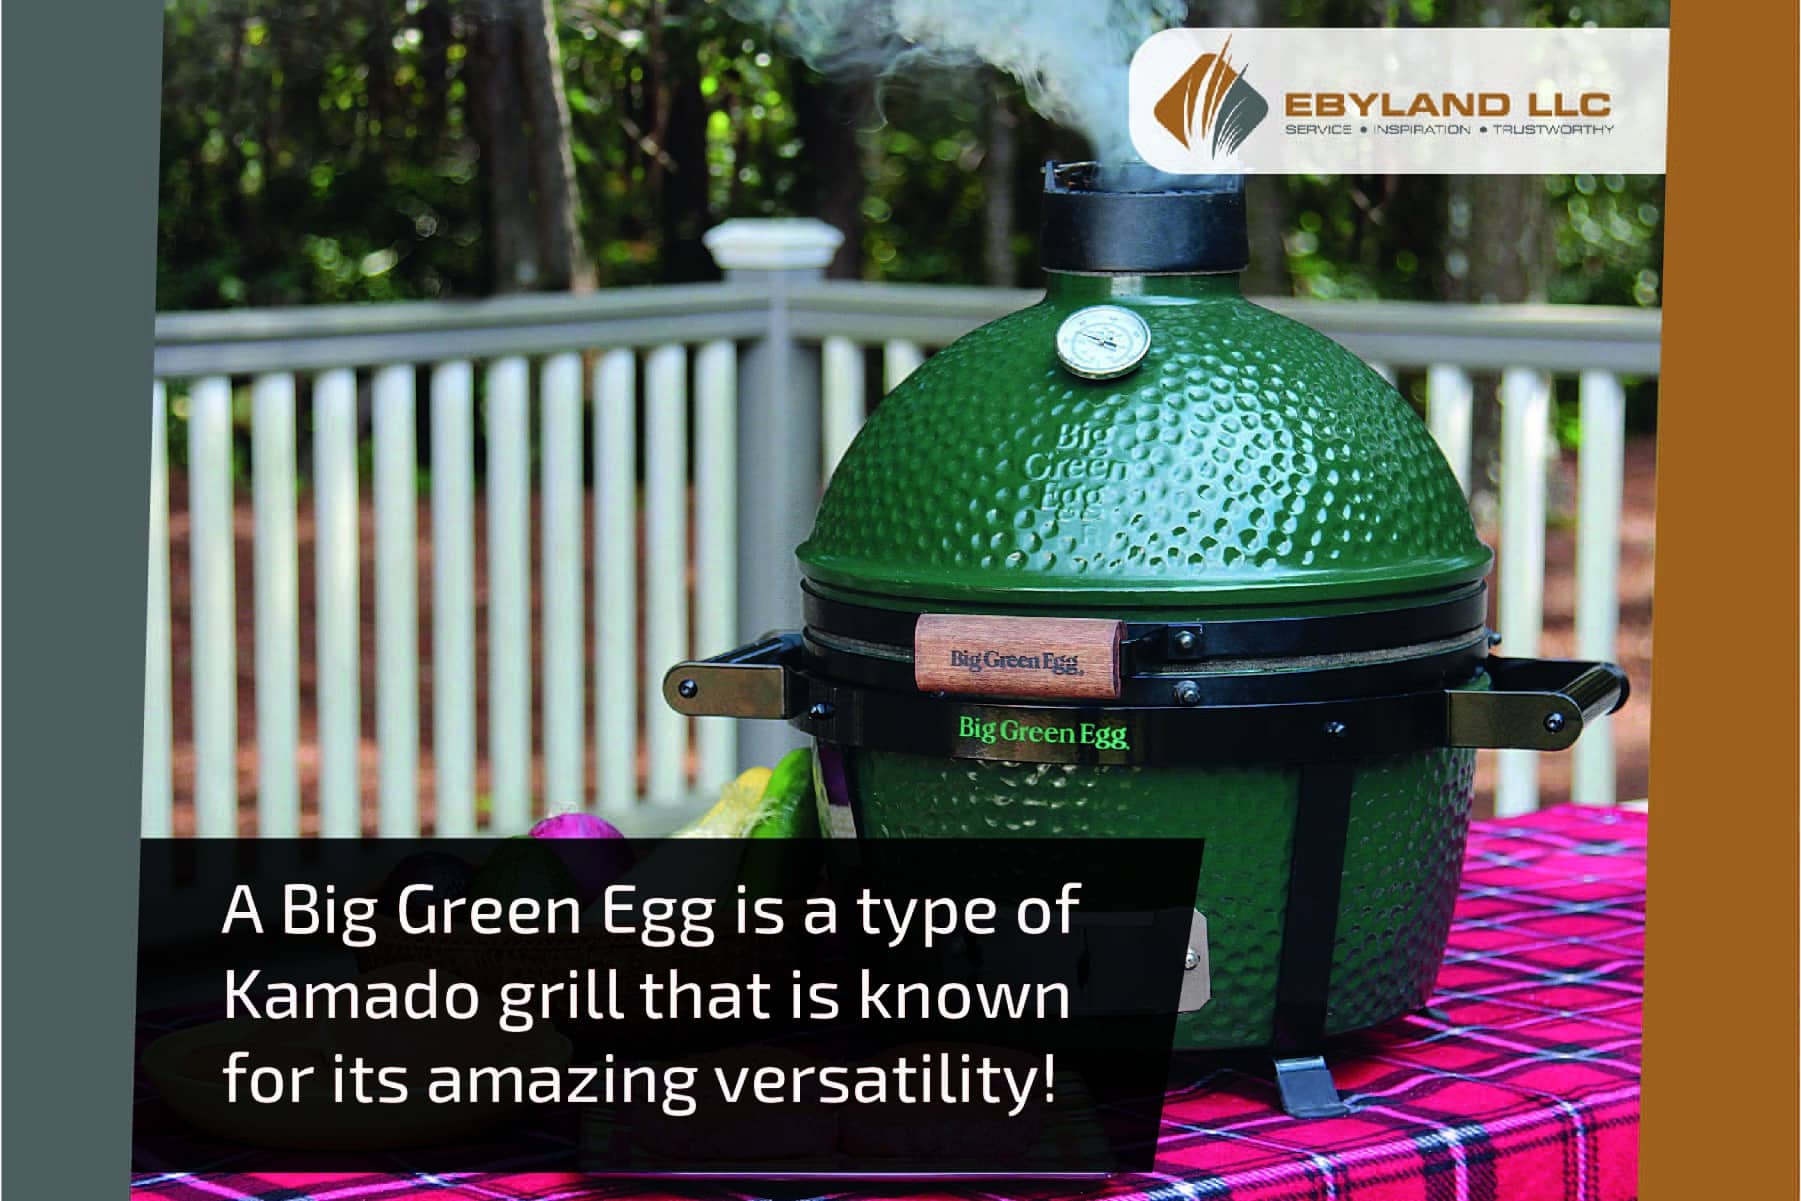 A Big Green Egg is a type of Kamado grill